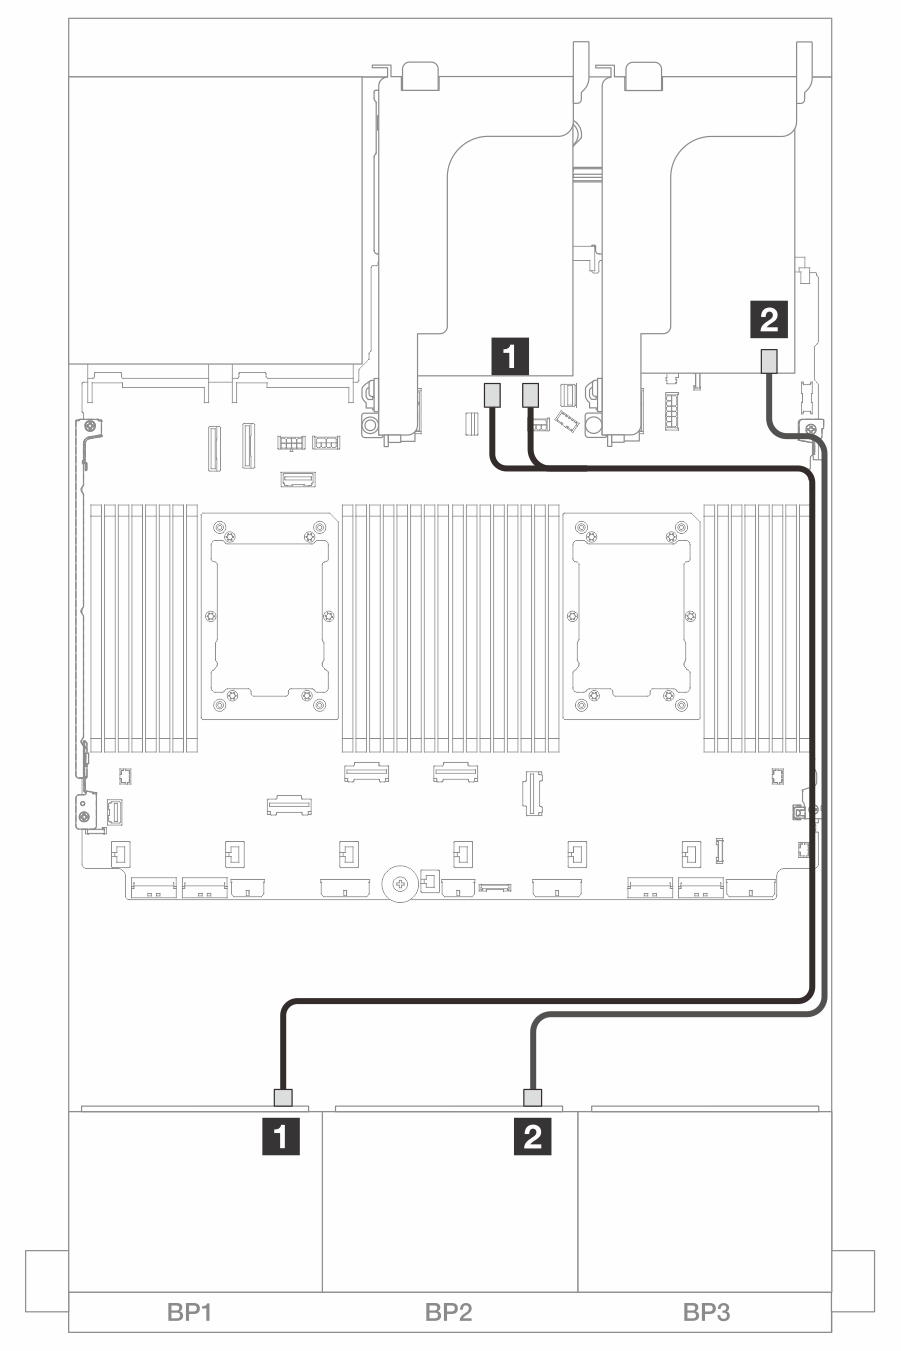 SAS/SATA cable routing to onboard SATA connectors and 8i adapter